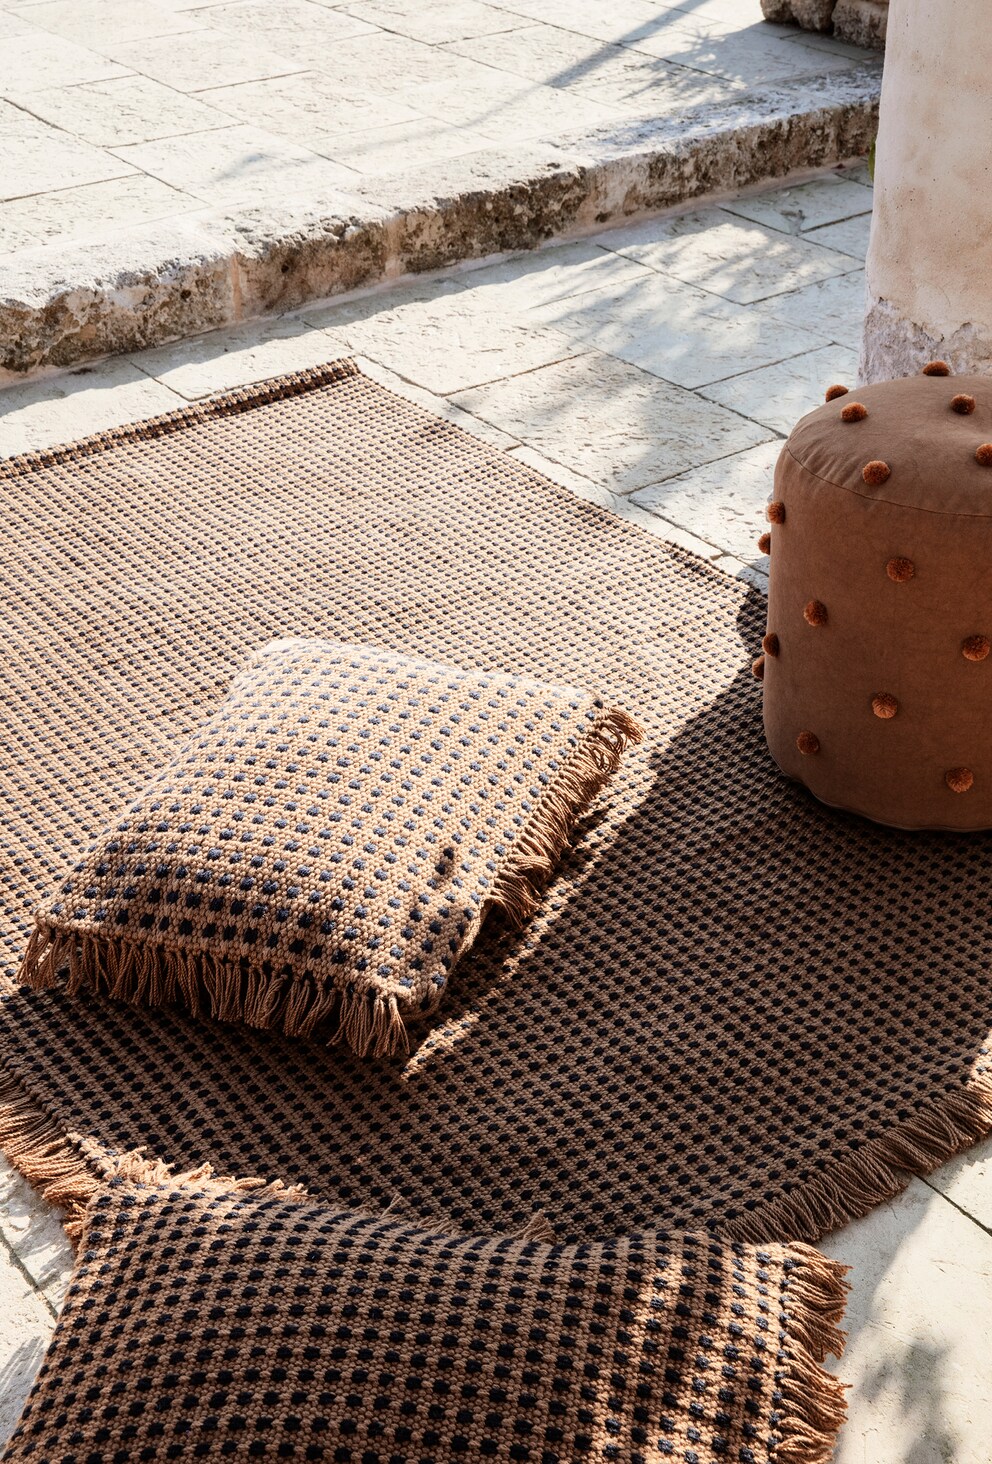 An outdoor carpet and cushions provide comfort on the terrace.  Image: Ferm Living